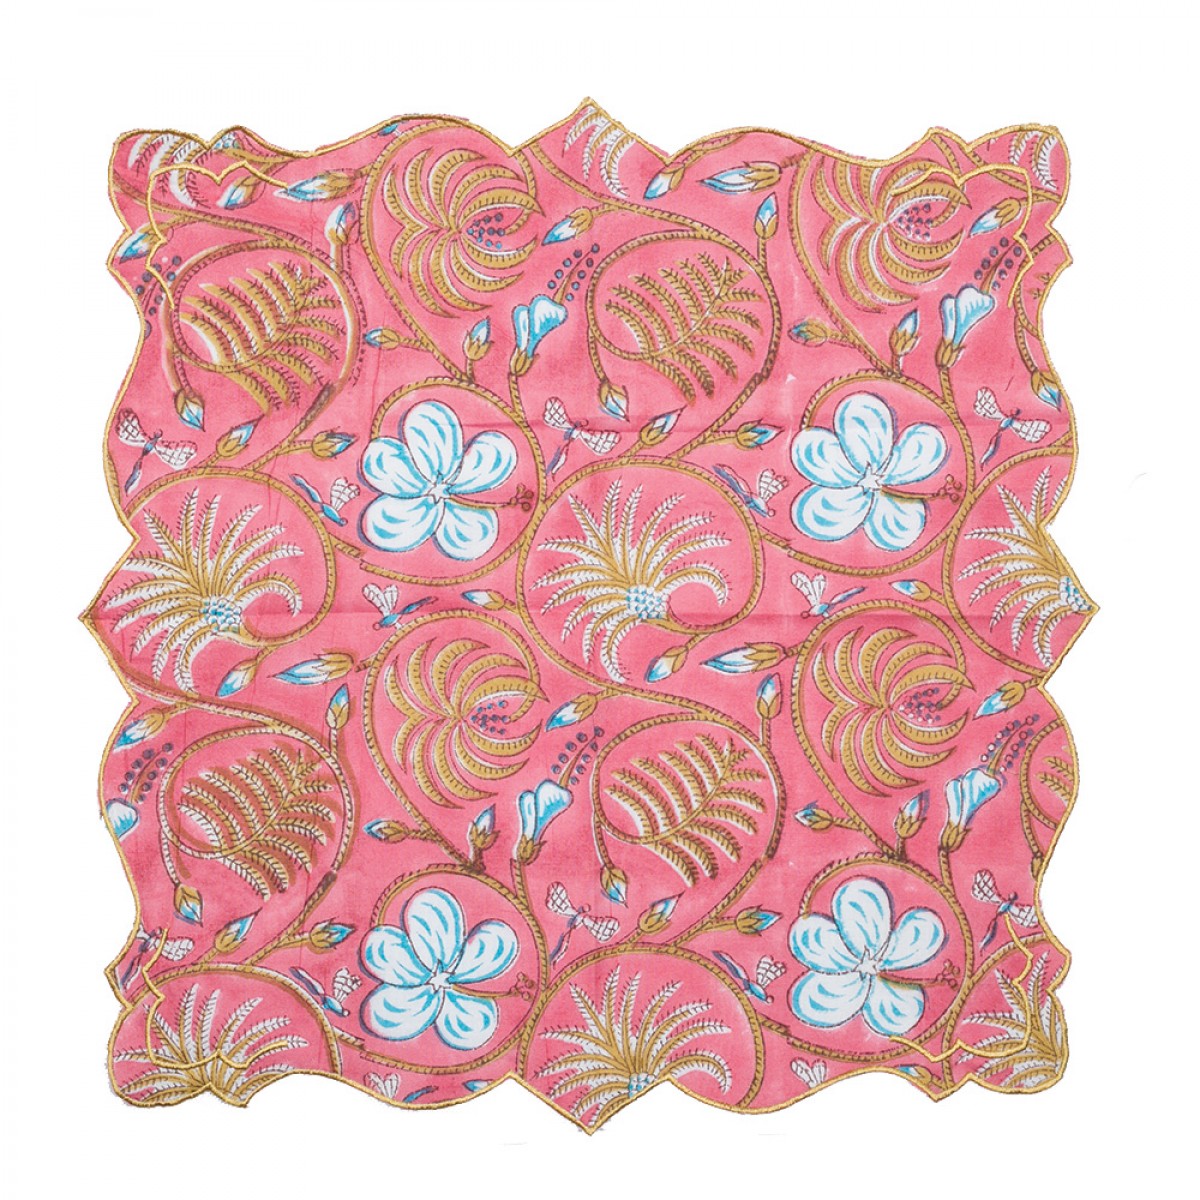 Cotton Scallop Embroidered Printed Napkin - Rose (Set of 6)